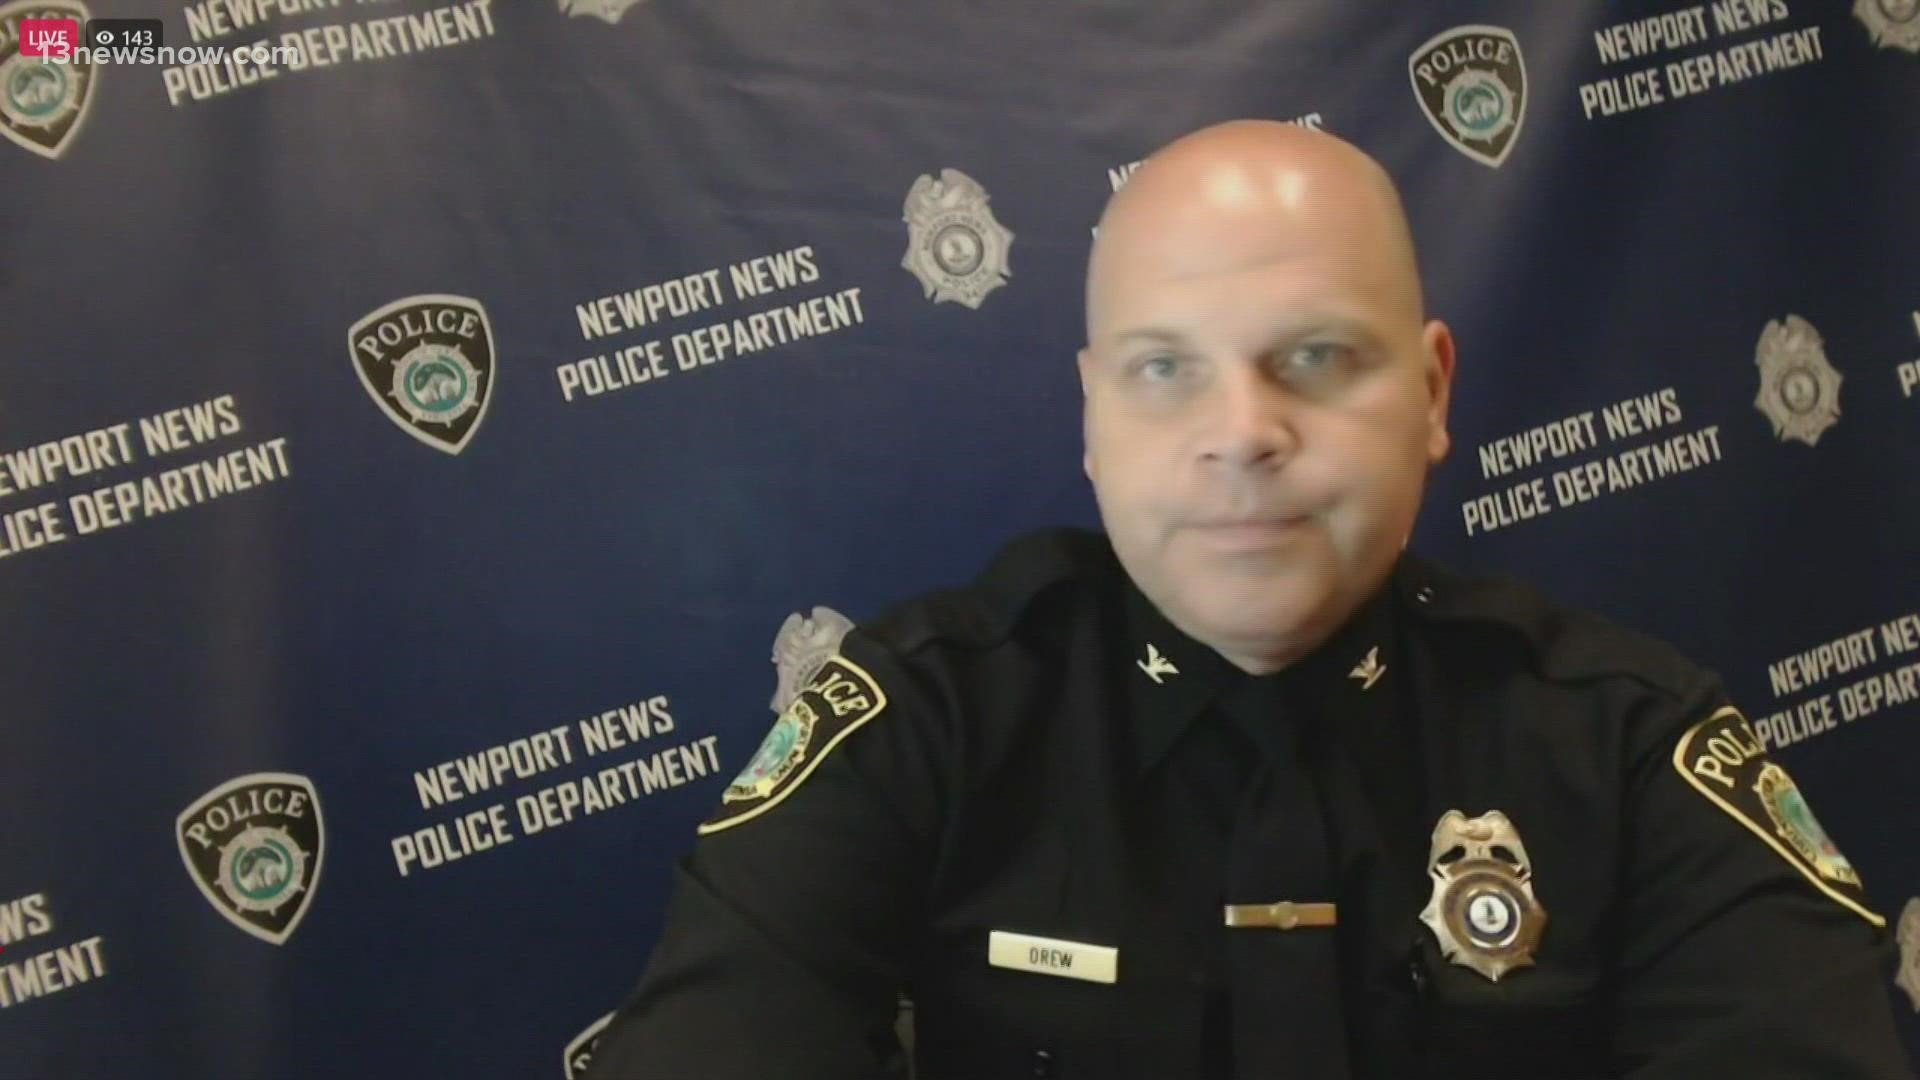 Chief Steve Drew said his heart goes out to the people who were hurt. The suspect is a 15-year-old student there, who Drew said knew the two students who were shot.